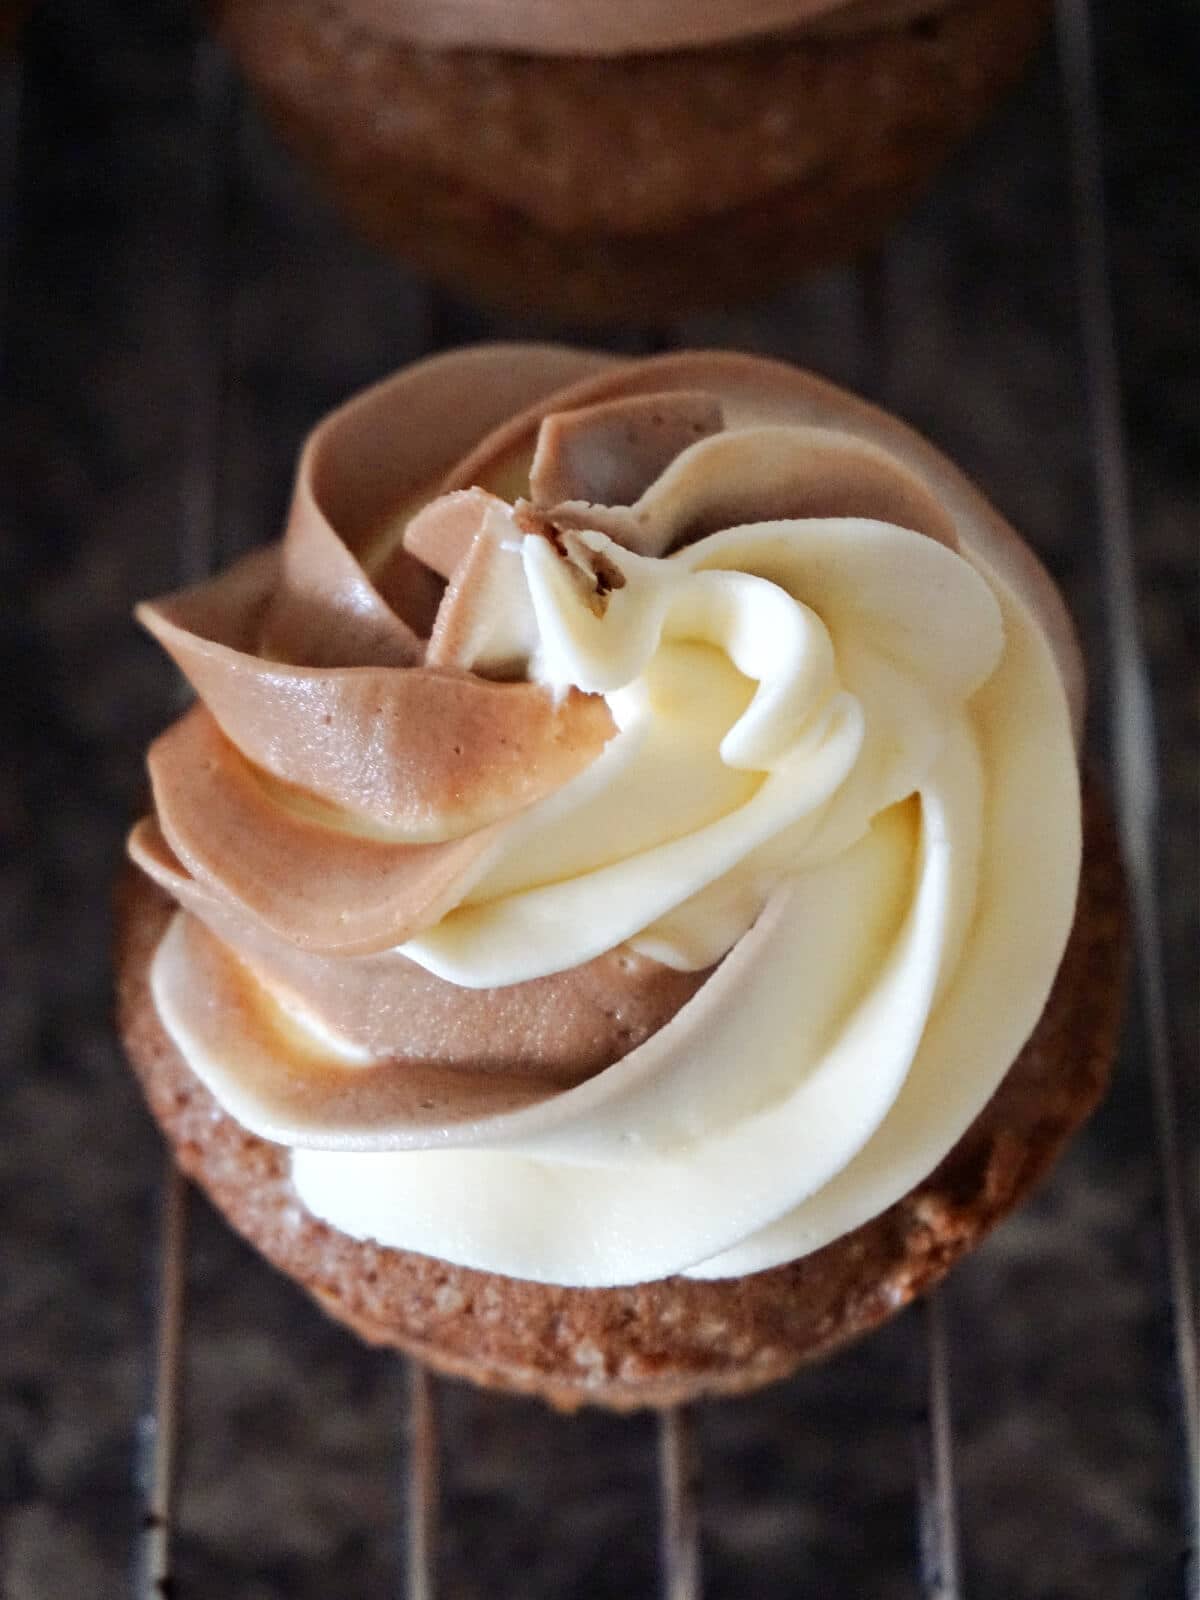 Close-up shot of a cupcake top that has duo icing